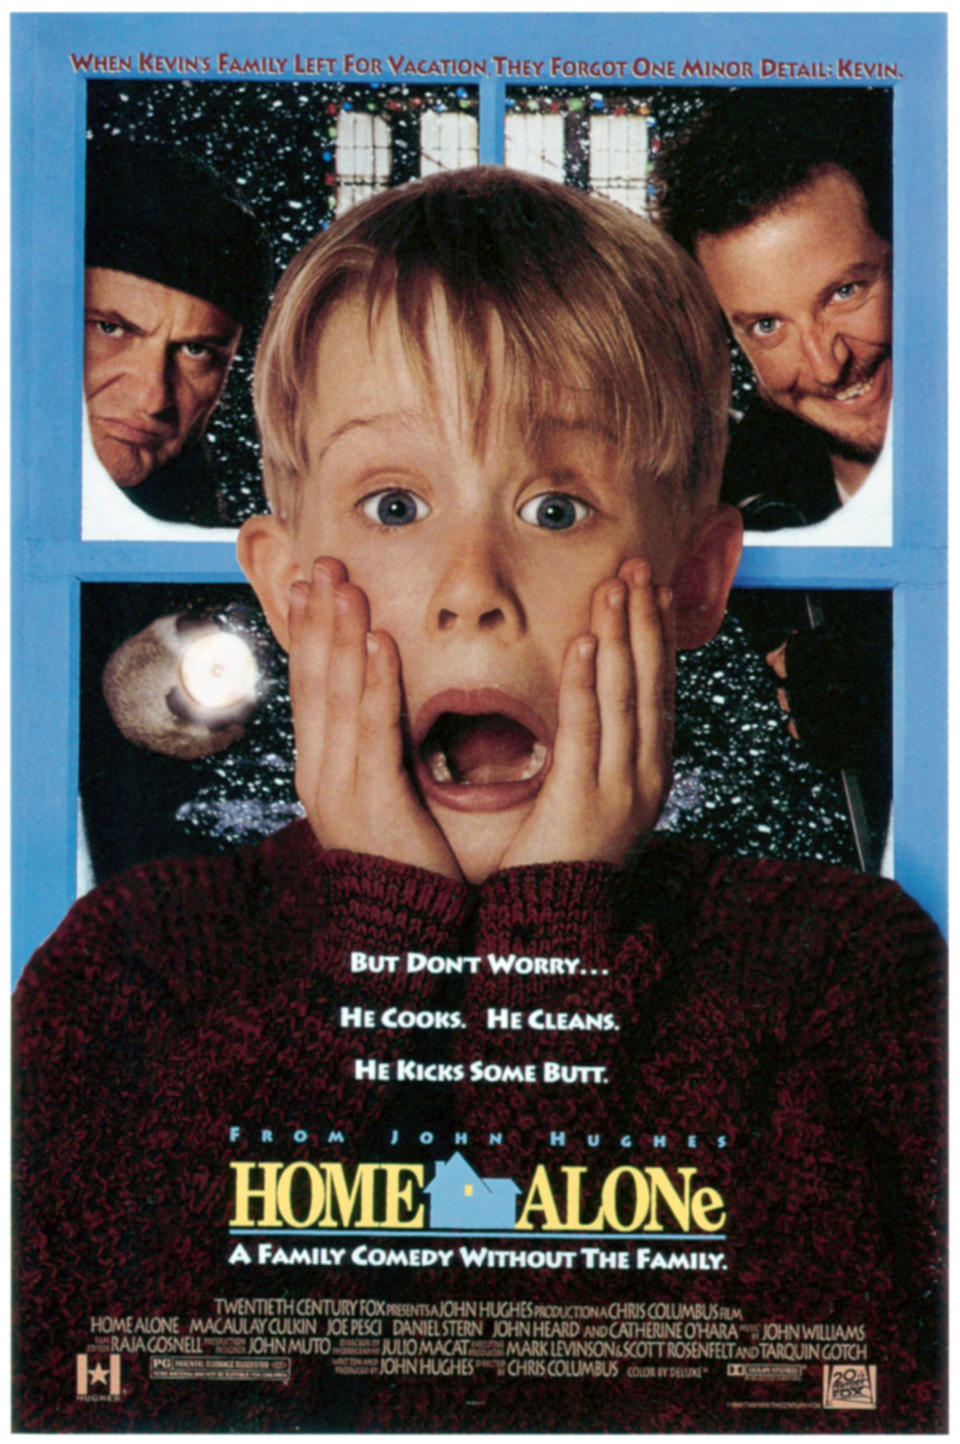 Movie poster of "Home Alone" featuring Kevin with a shocked expression and two burglars behind him